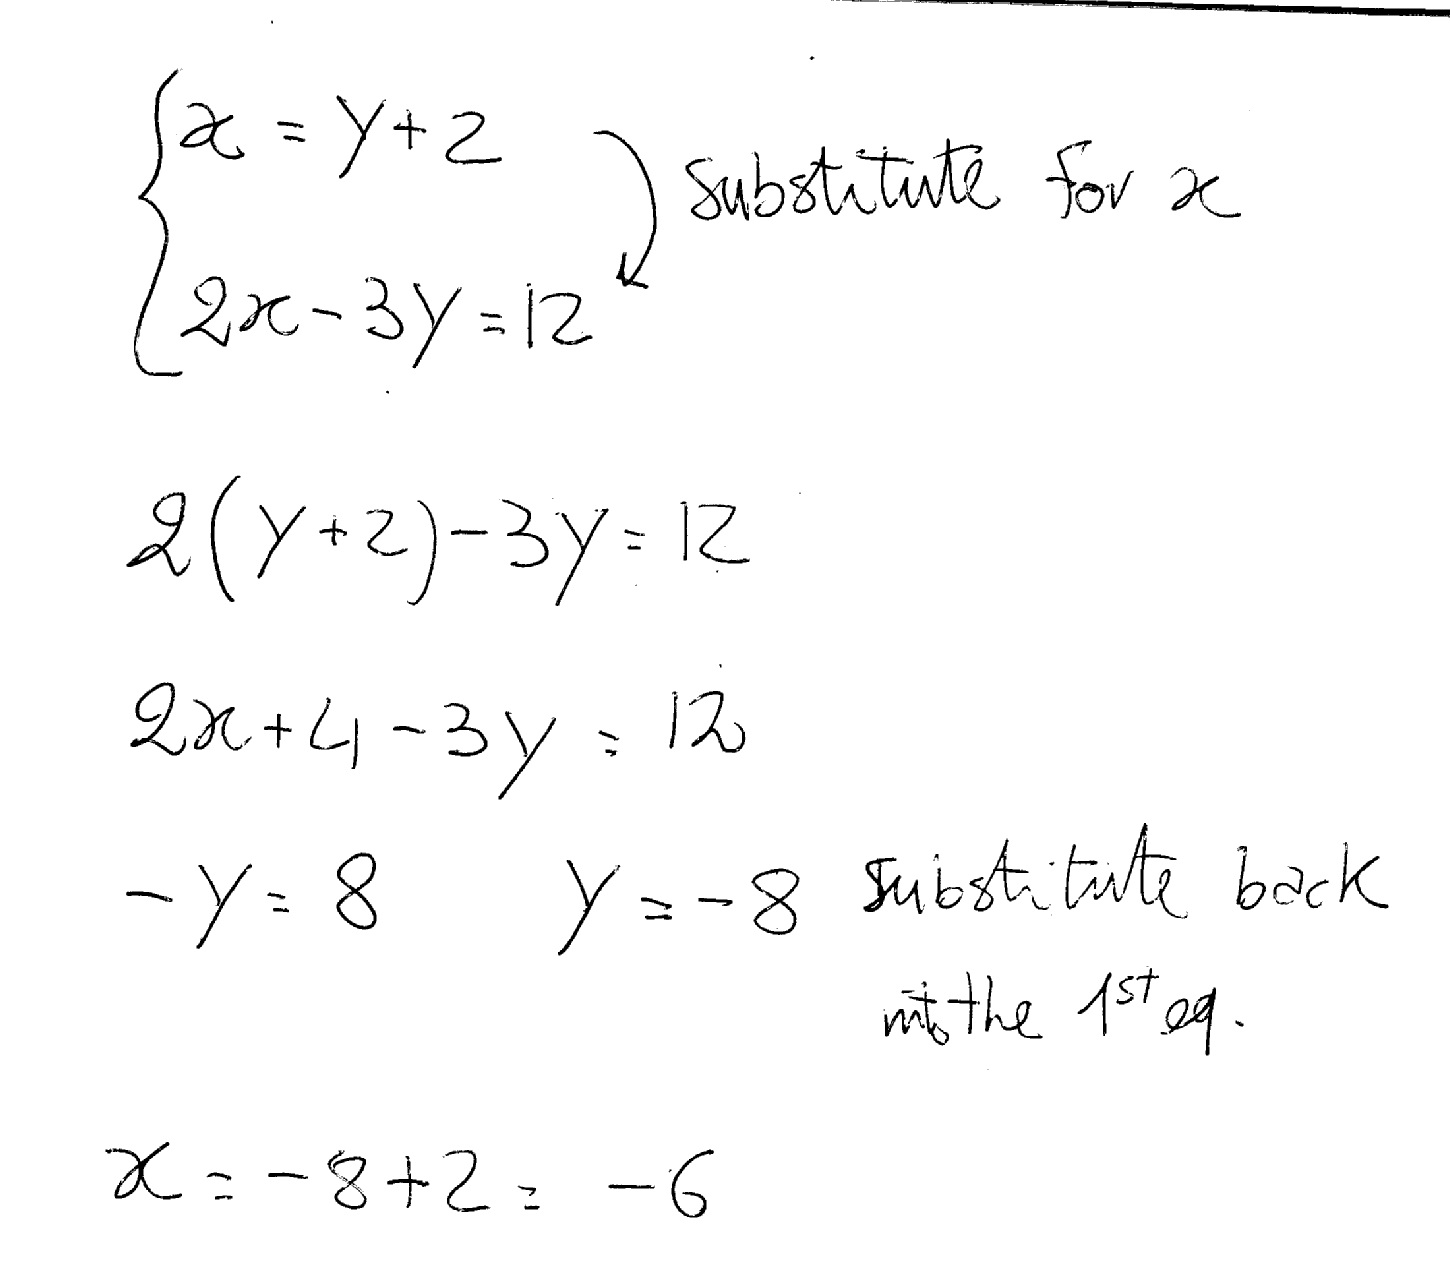 how-to-find-solution-system-of-equations-we-can-eliminate-by-adding-twice-the-second-equation